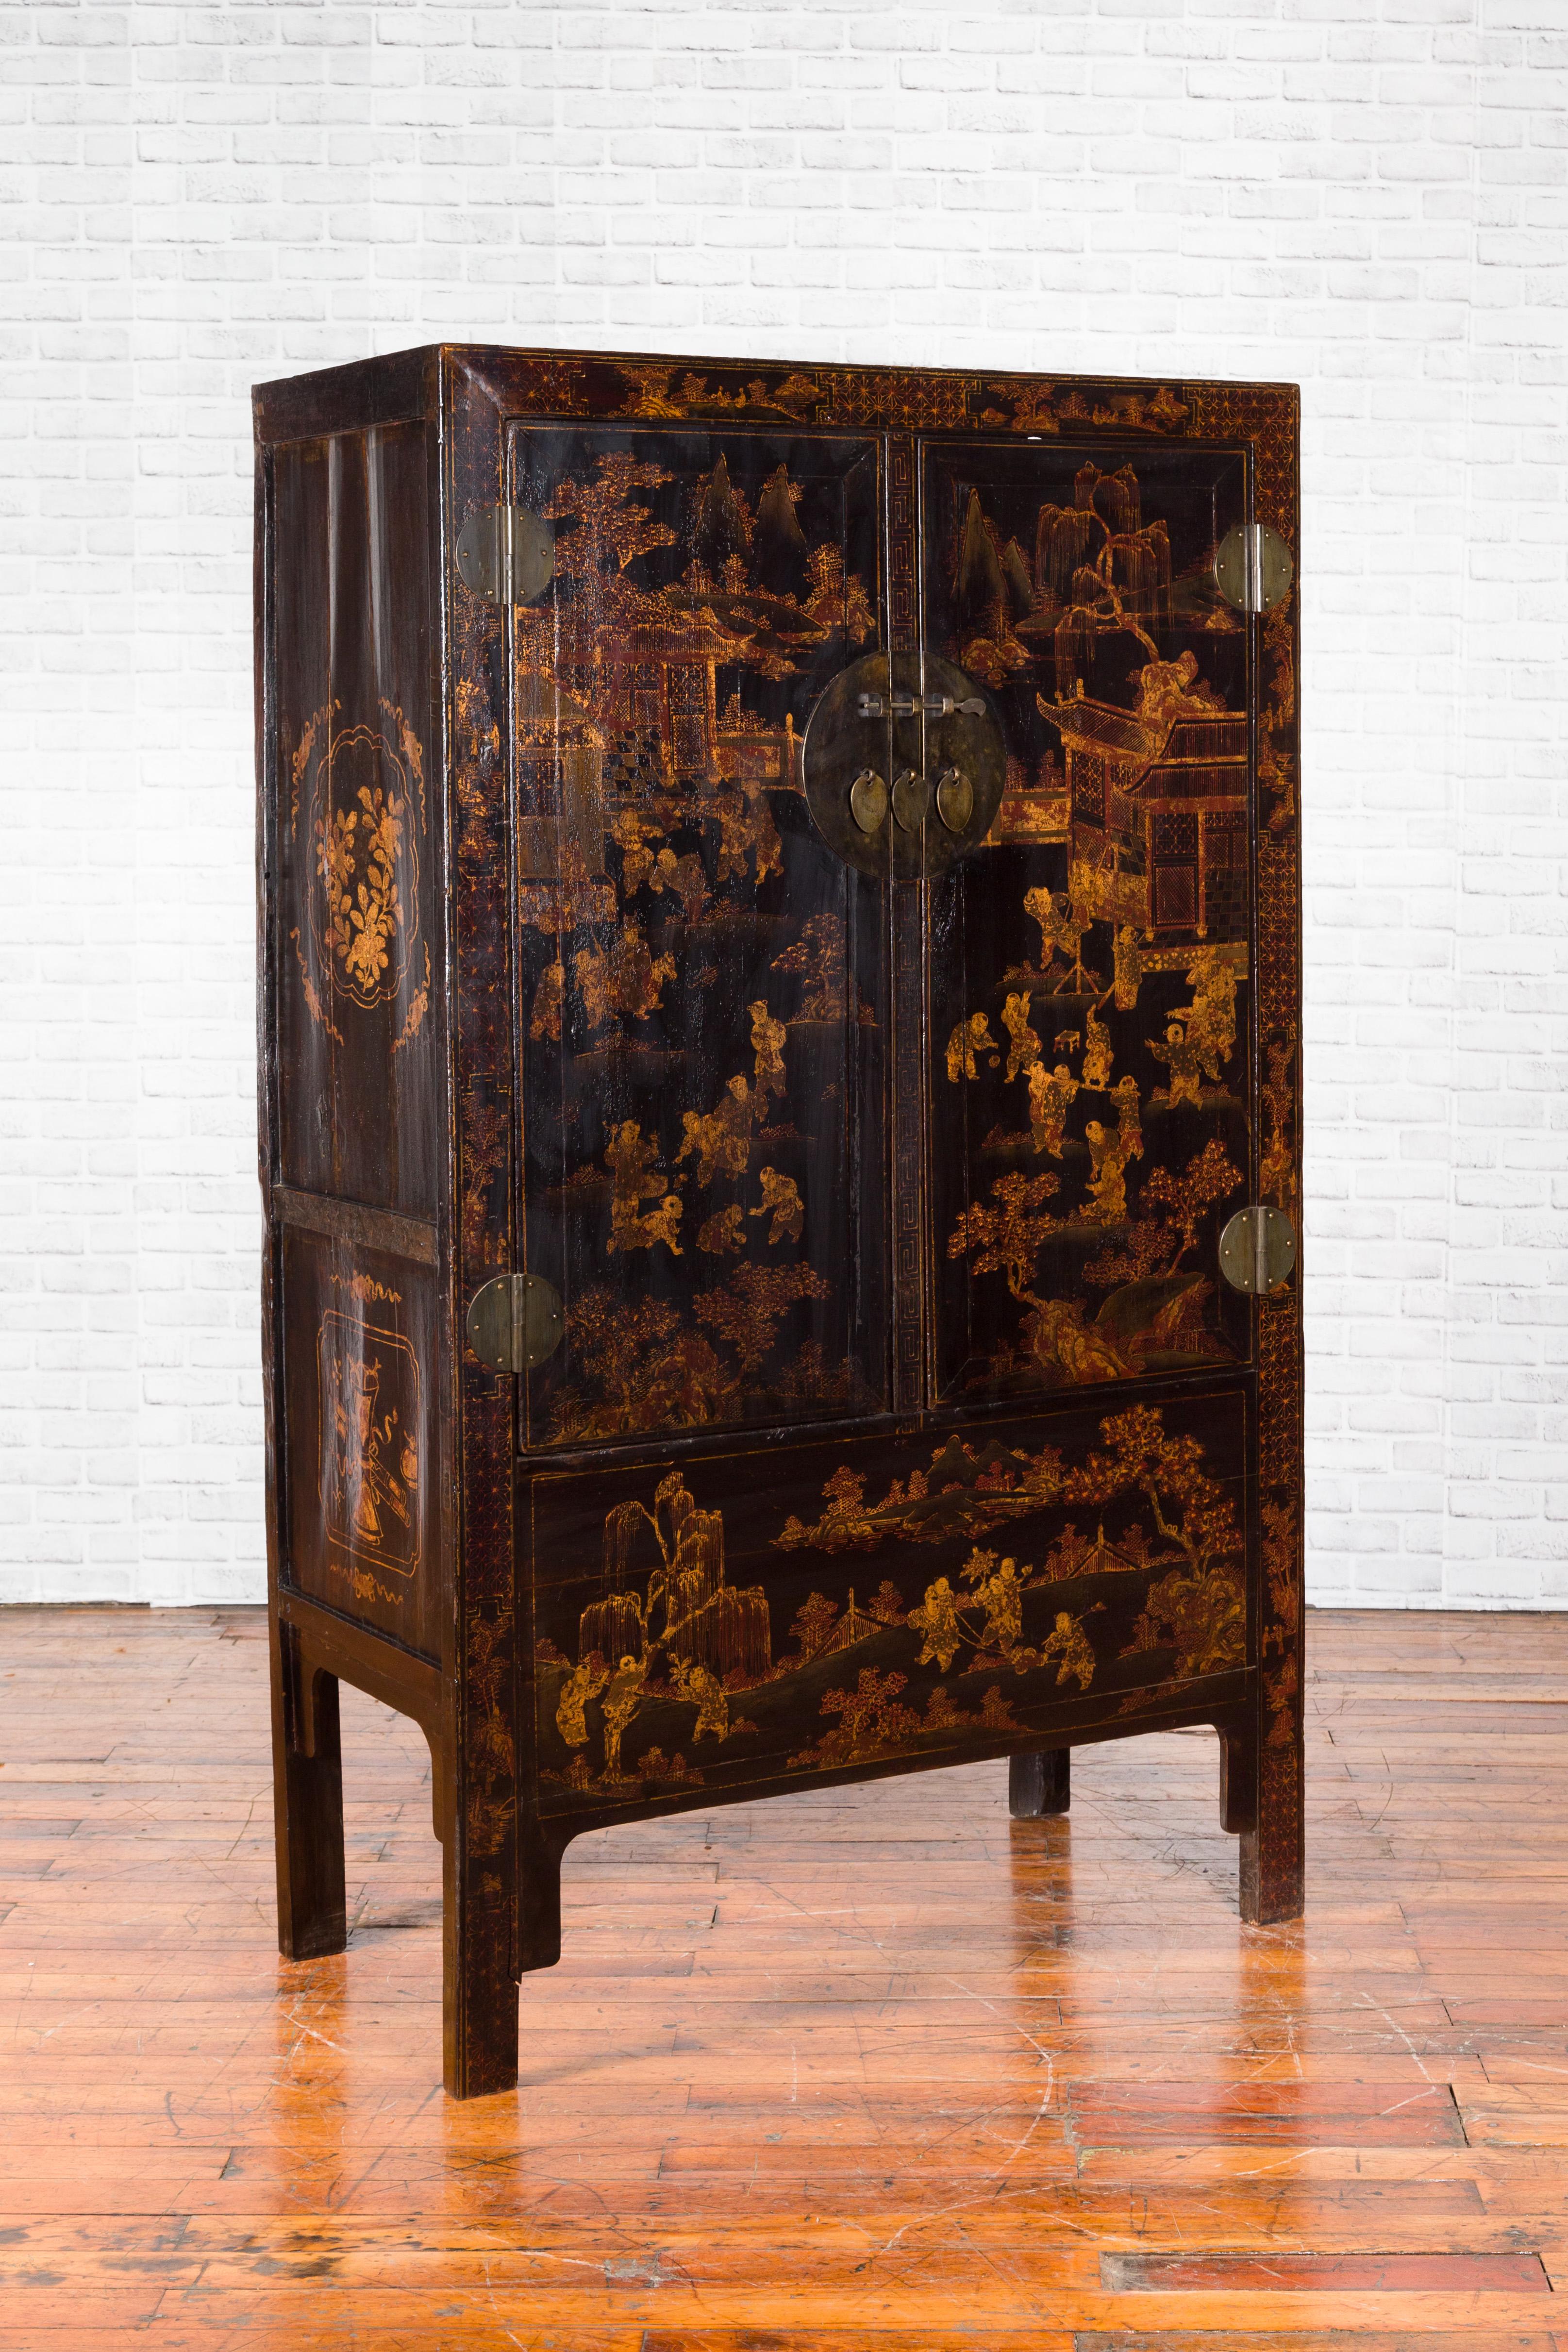 Chinese Qing Dynasty 19th Century Black Lacquer Cabinet with Gilt Chinoiserie Decor